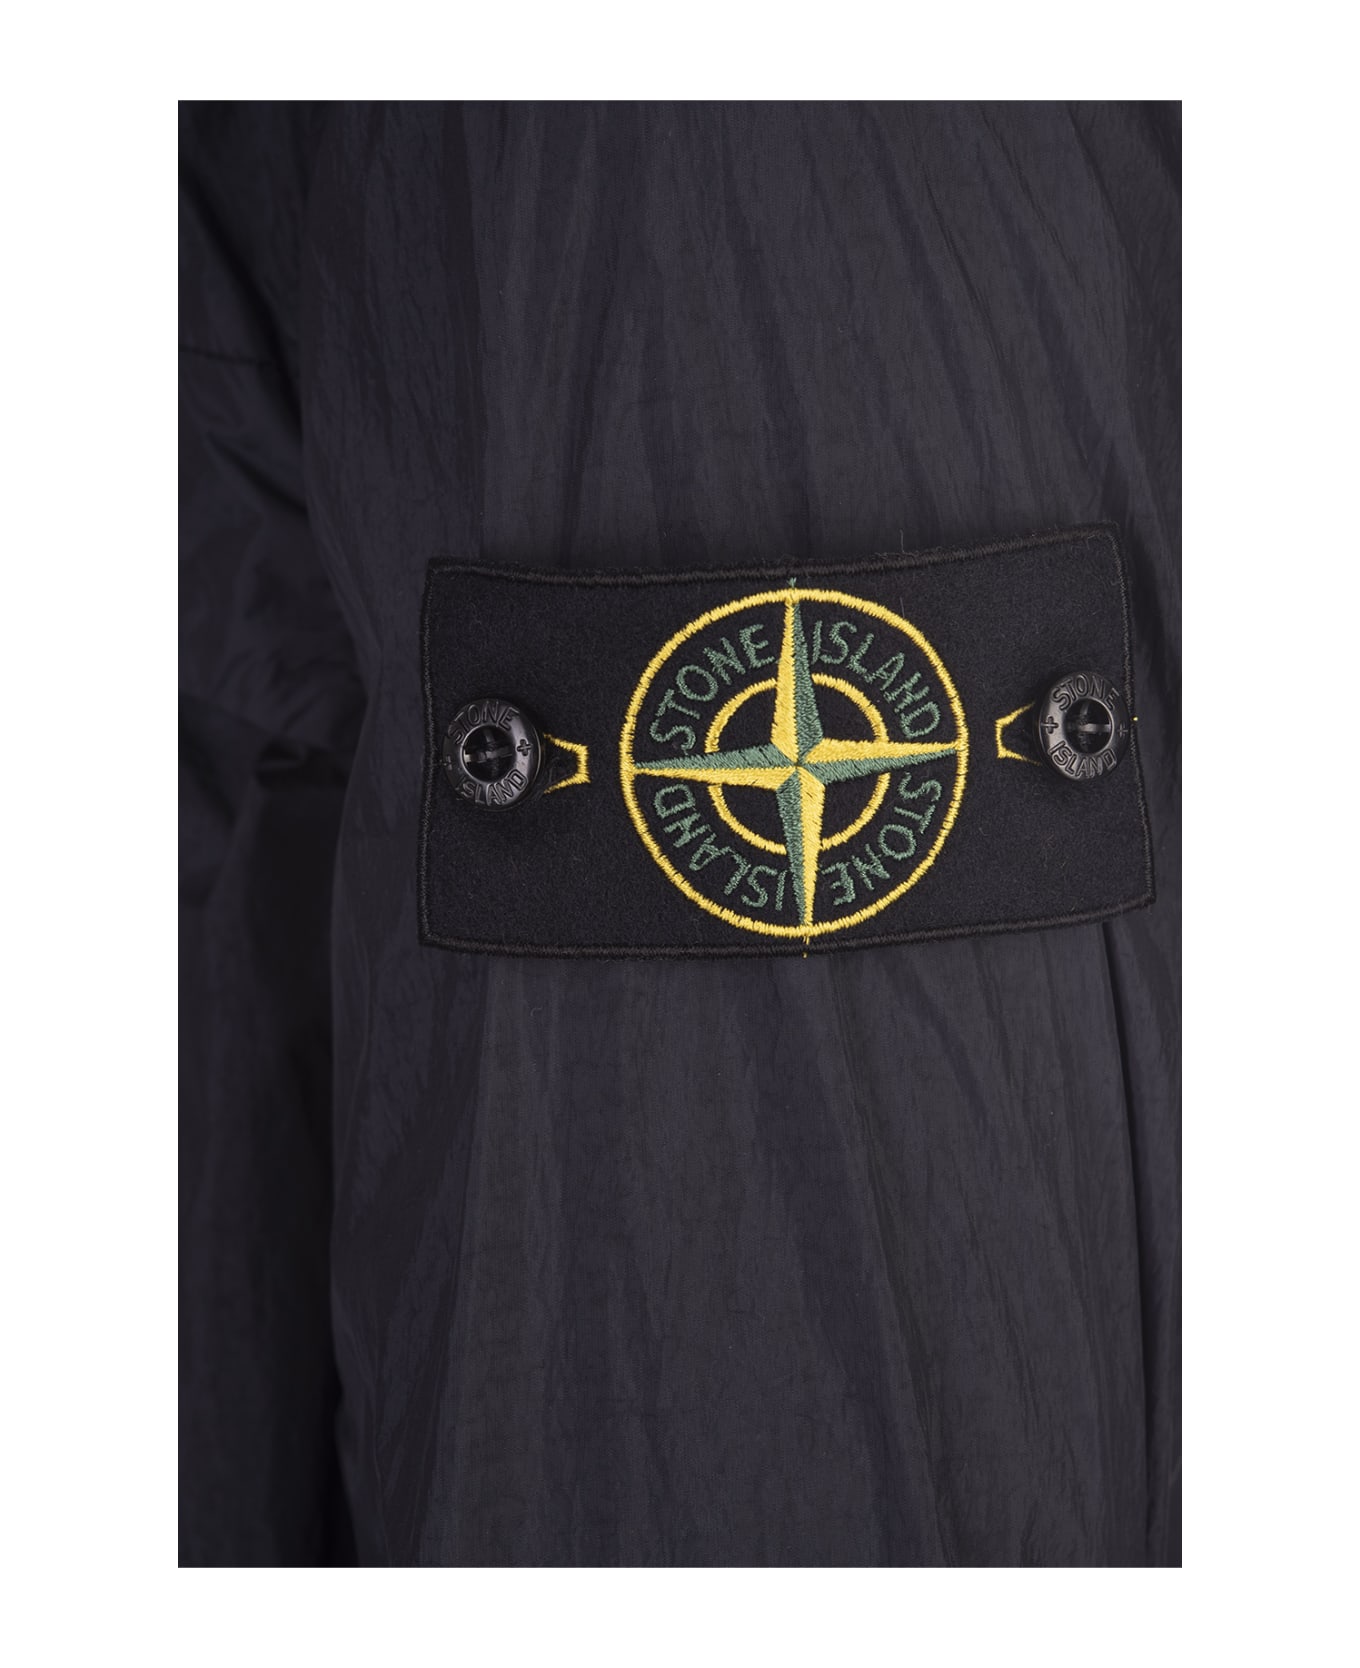 Stone Island Garment Dyed Crinkle Reps R-ny Lightweight Jacket In Navy Blue - Blue